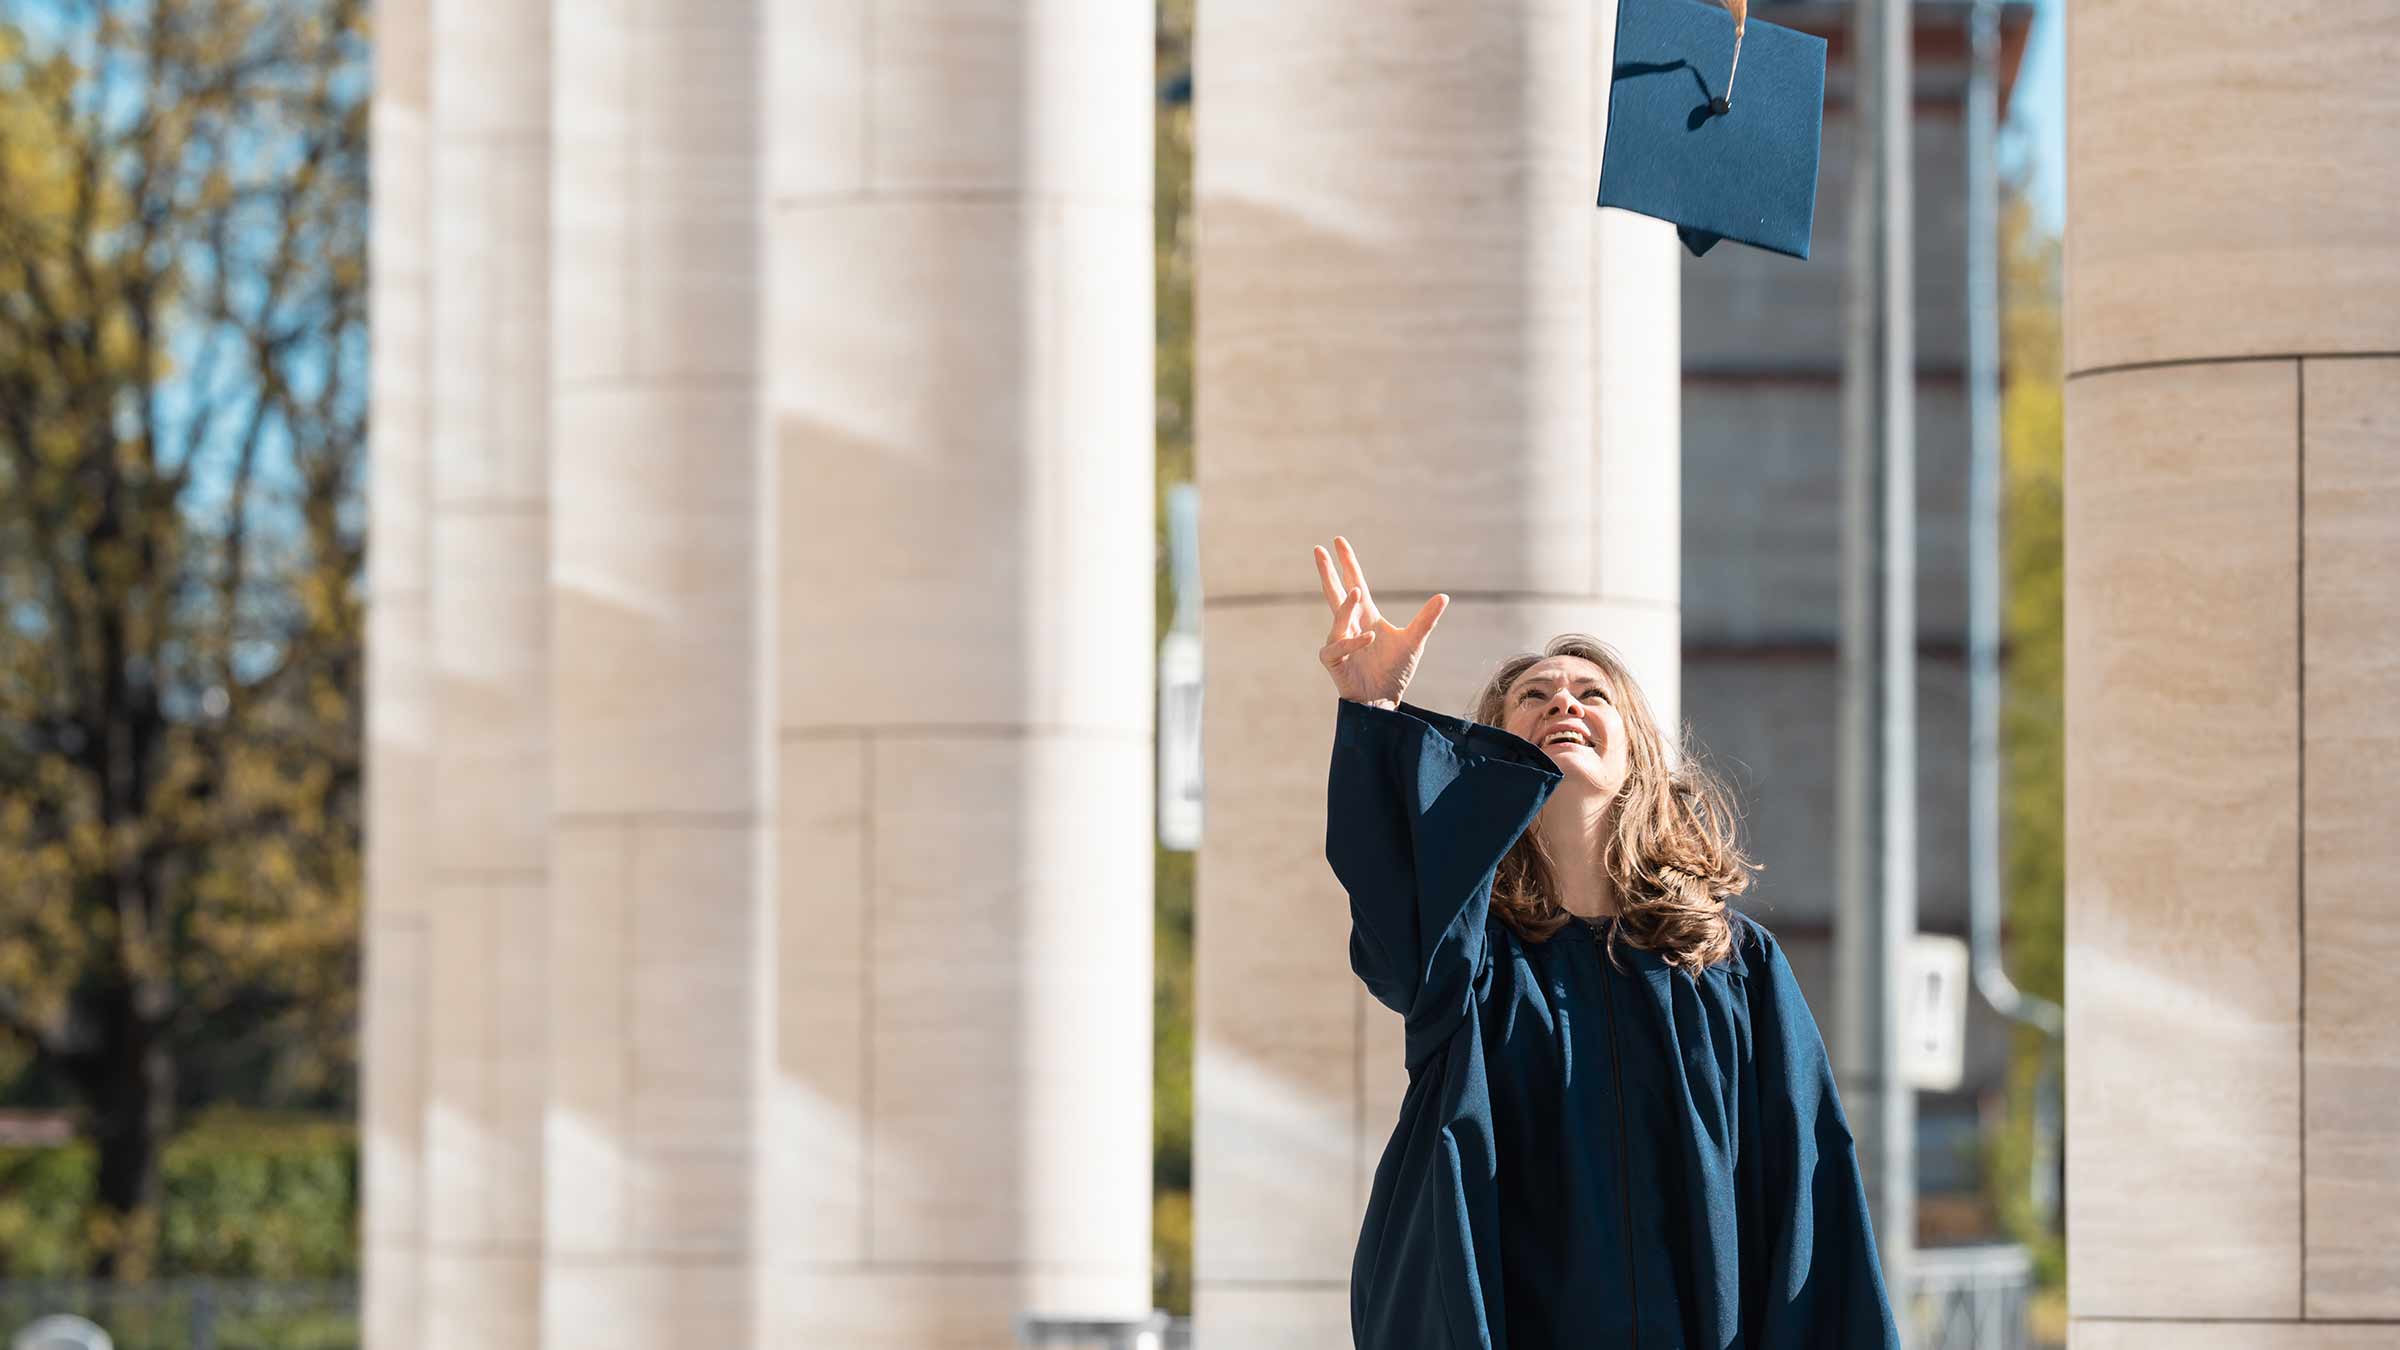 Woman throwing her graduation hat in the air